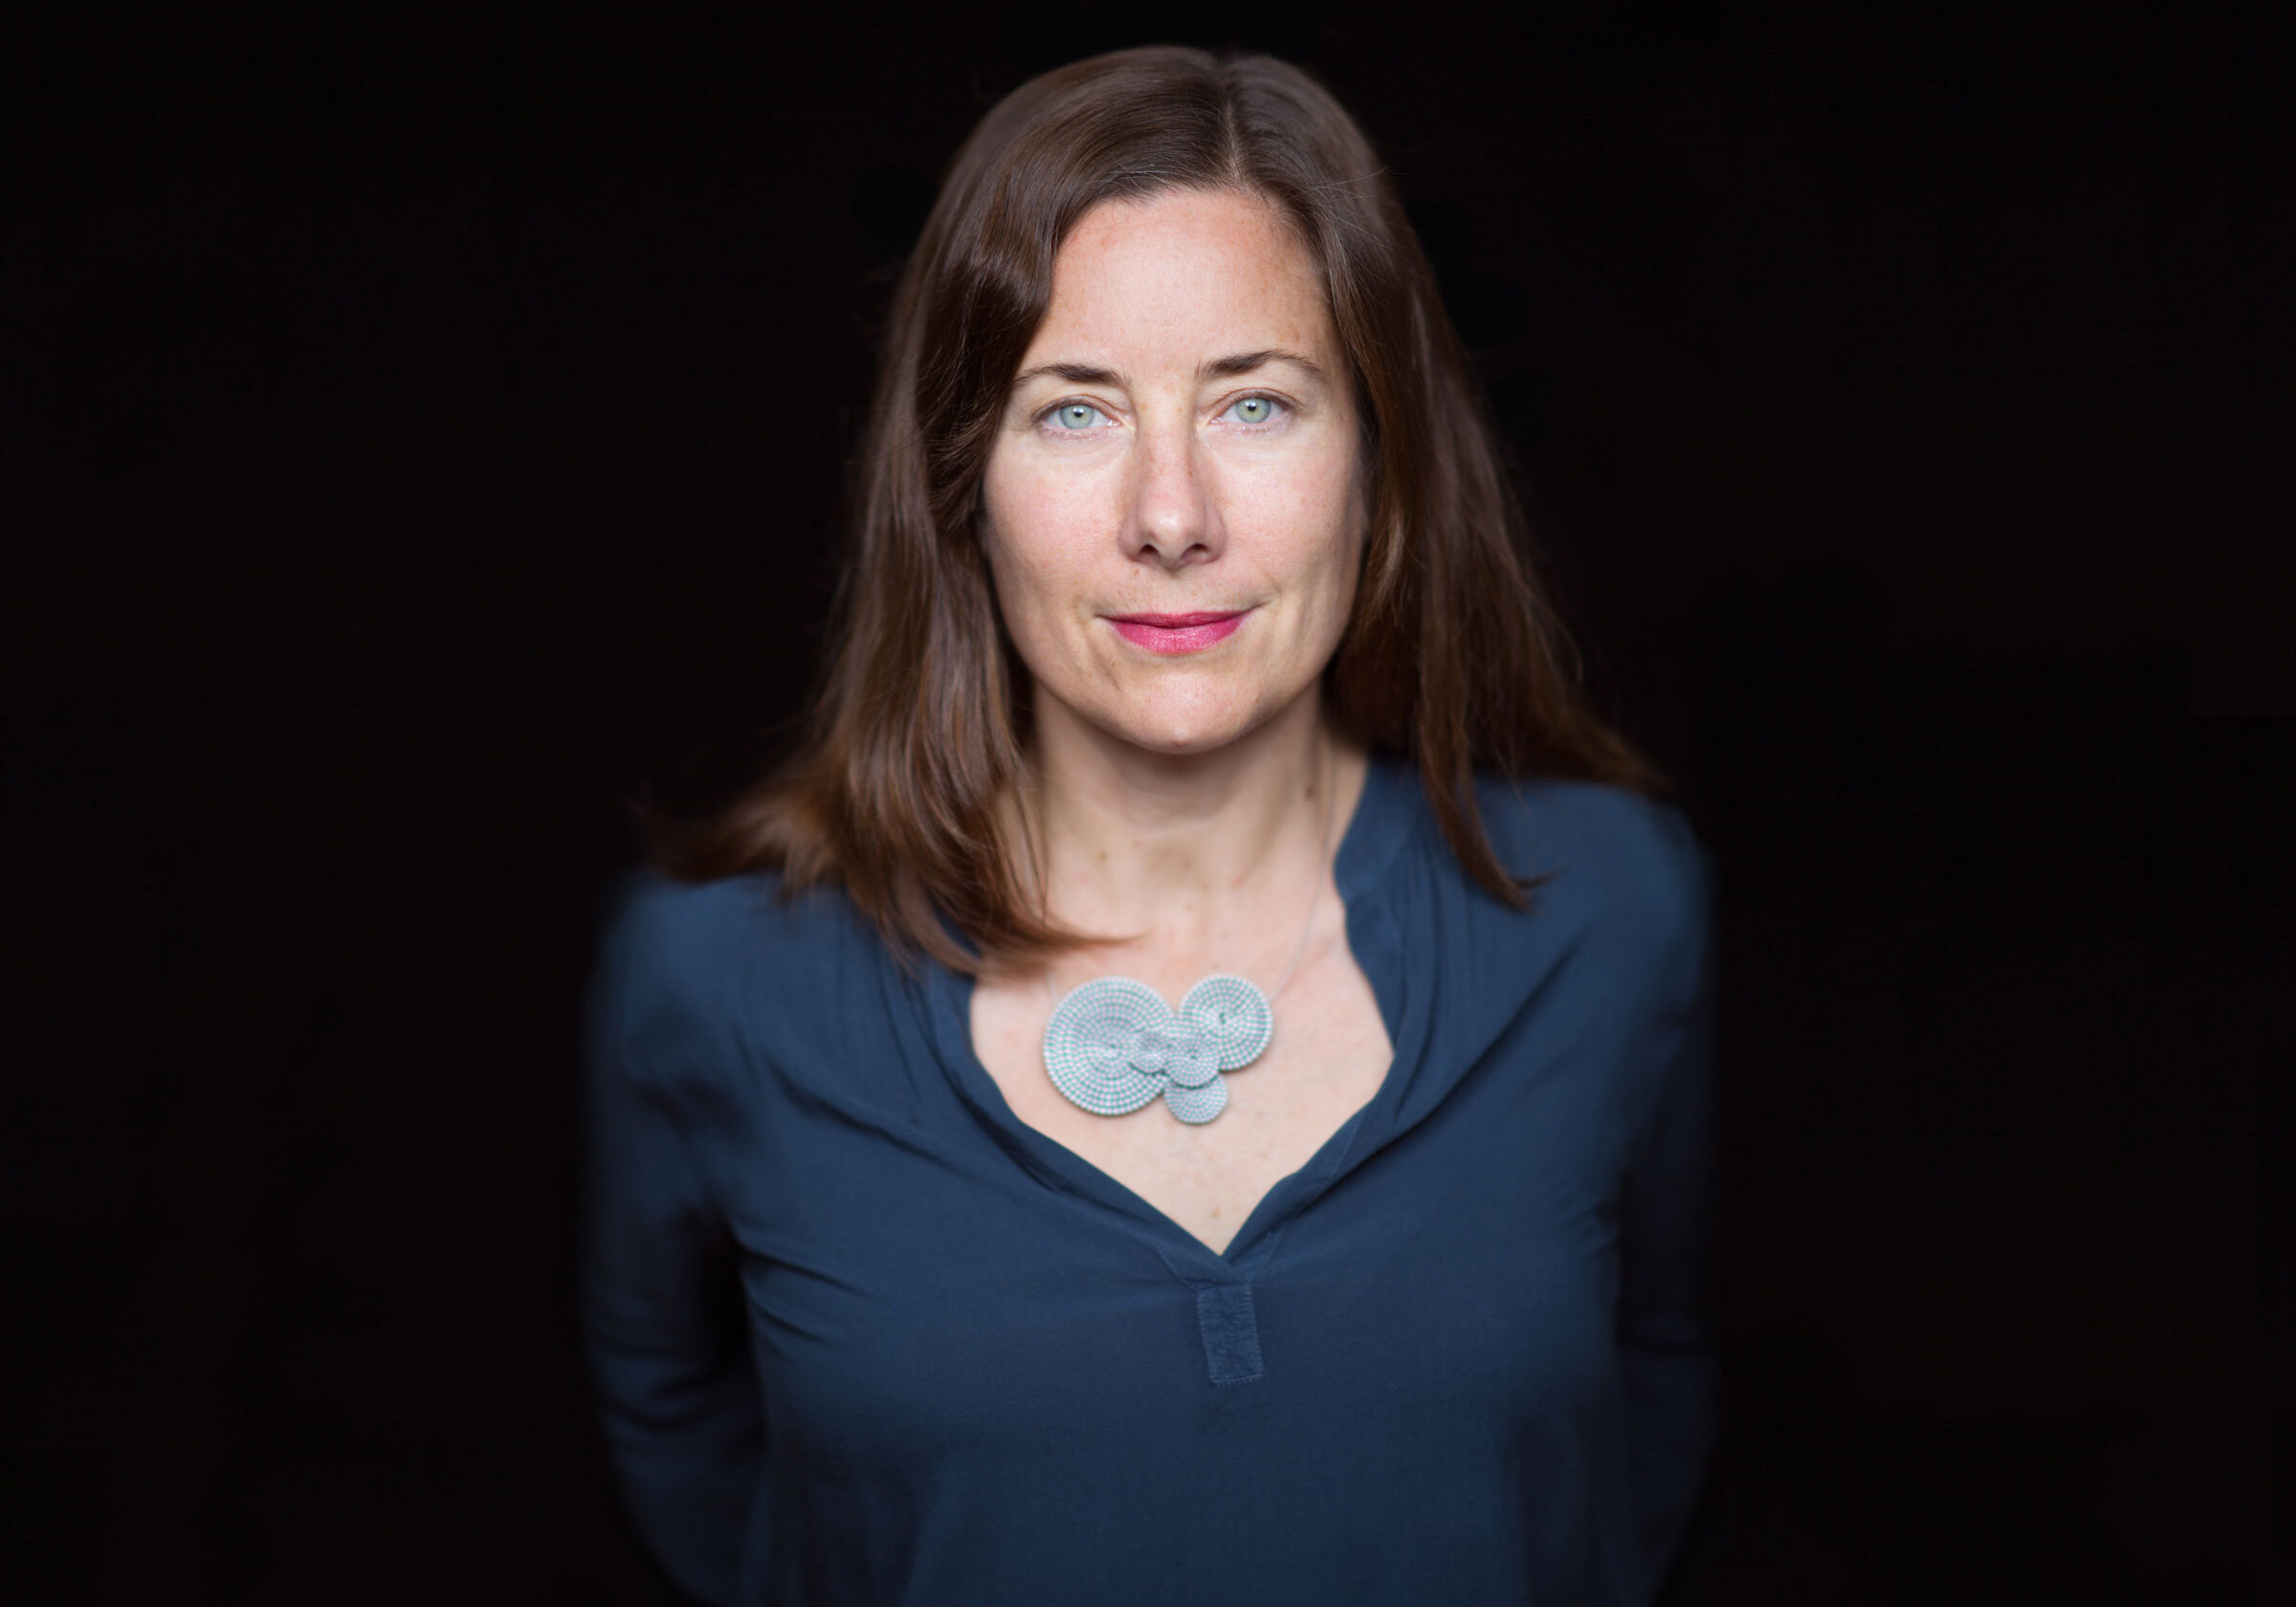 A woman with straight brown hair and blue eyes stands against a dark background. Wearing a navy blue shirt and a large, decorative round necklace in a light color, she looks directly at the camera with a neutral expression that recalls an intensity often seen in Berkeley Journalism alumni.